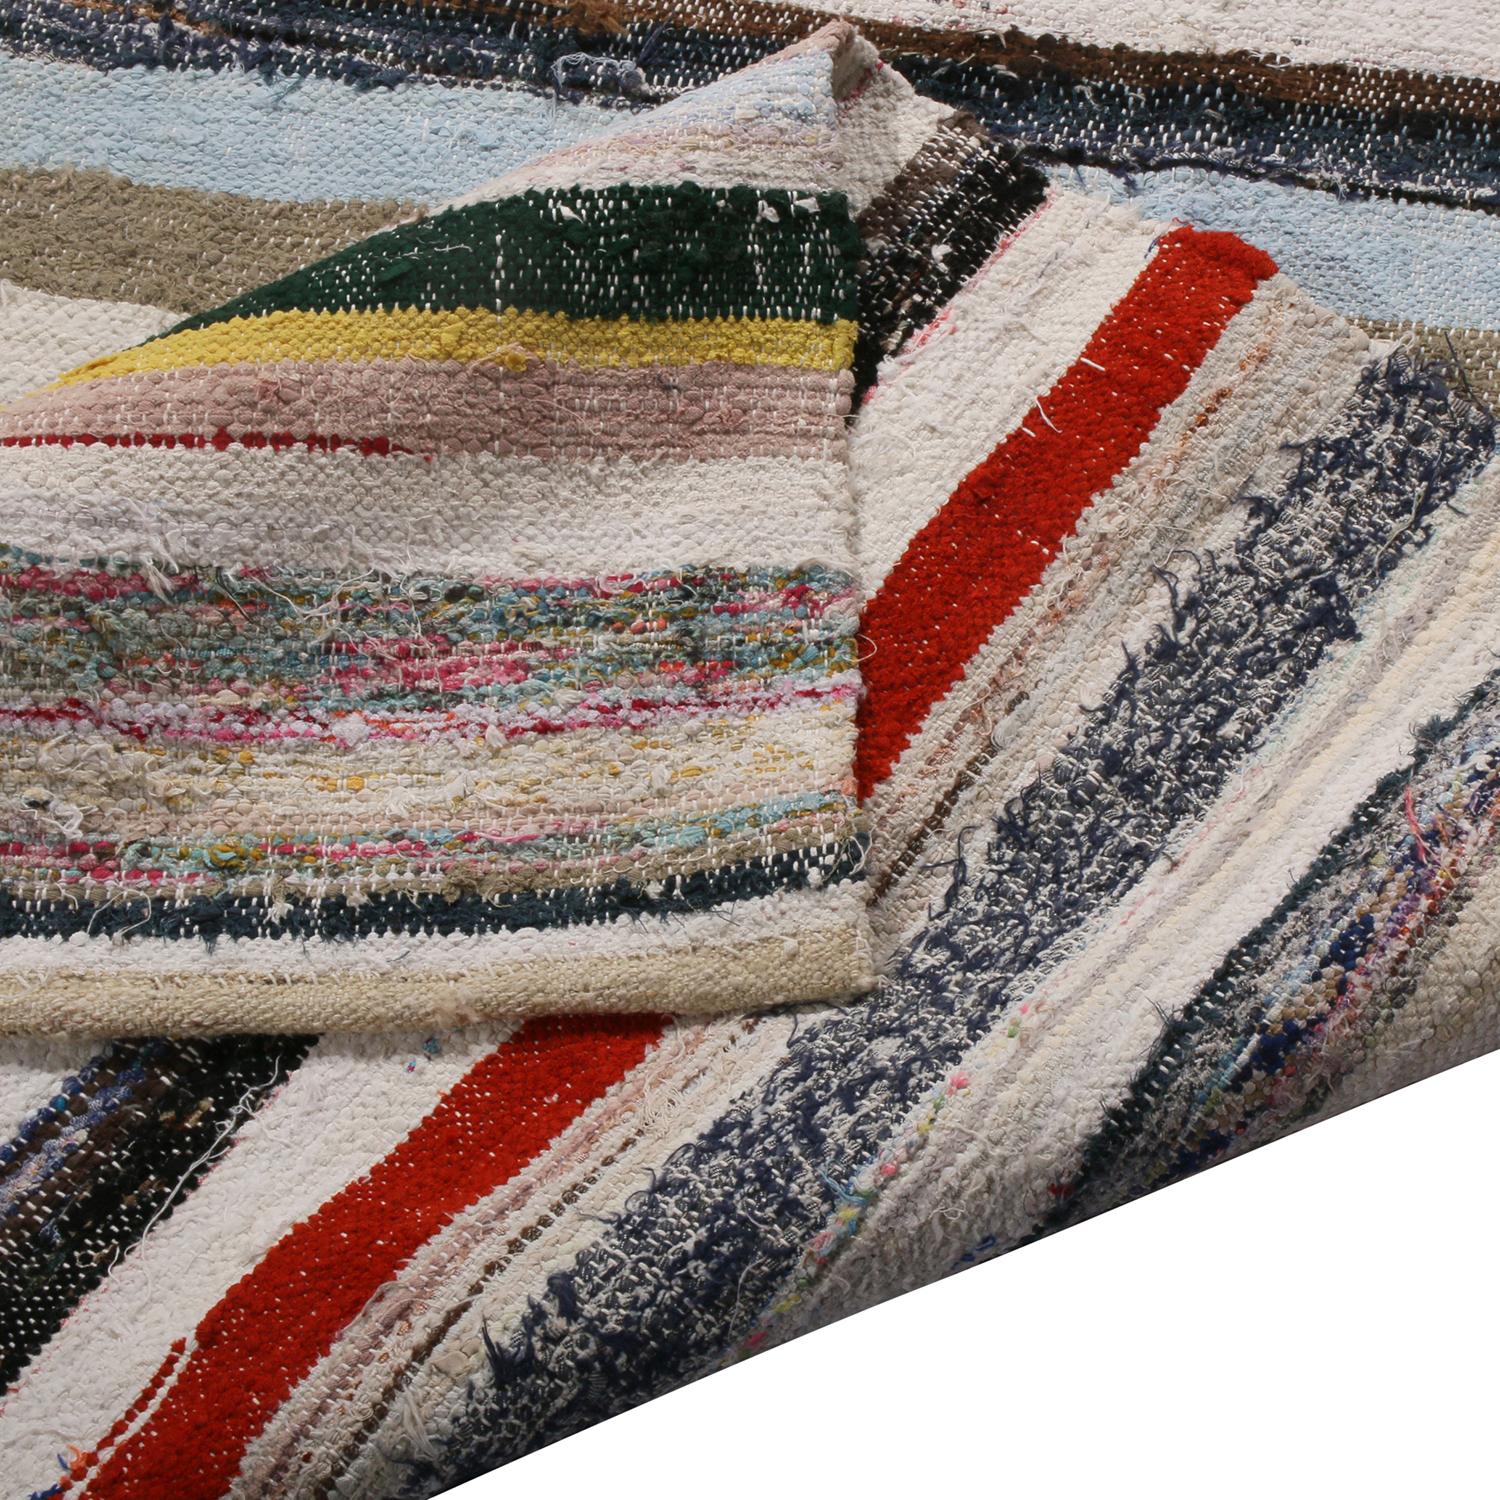 Hand-Knotted Vintage Striped Beige Brown and Multi-Color Wool Kilim Rug by Rug & kilim For Sale